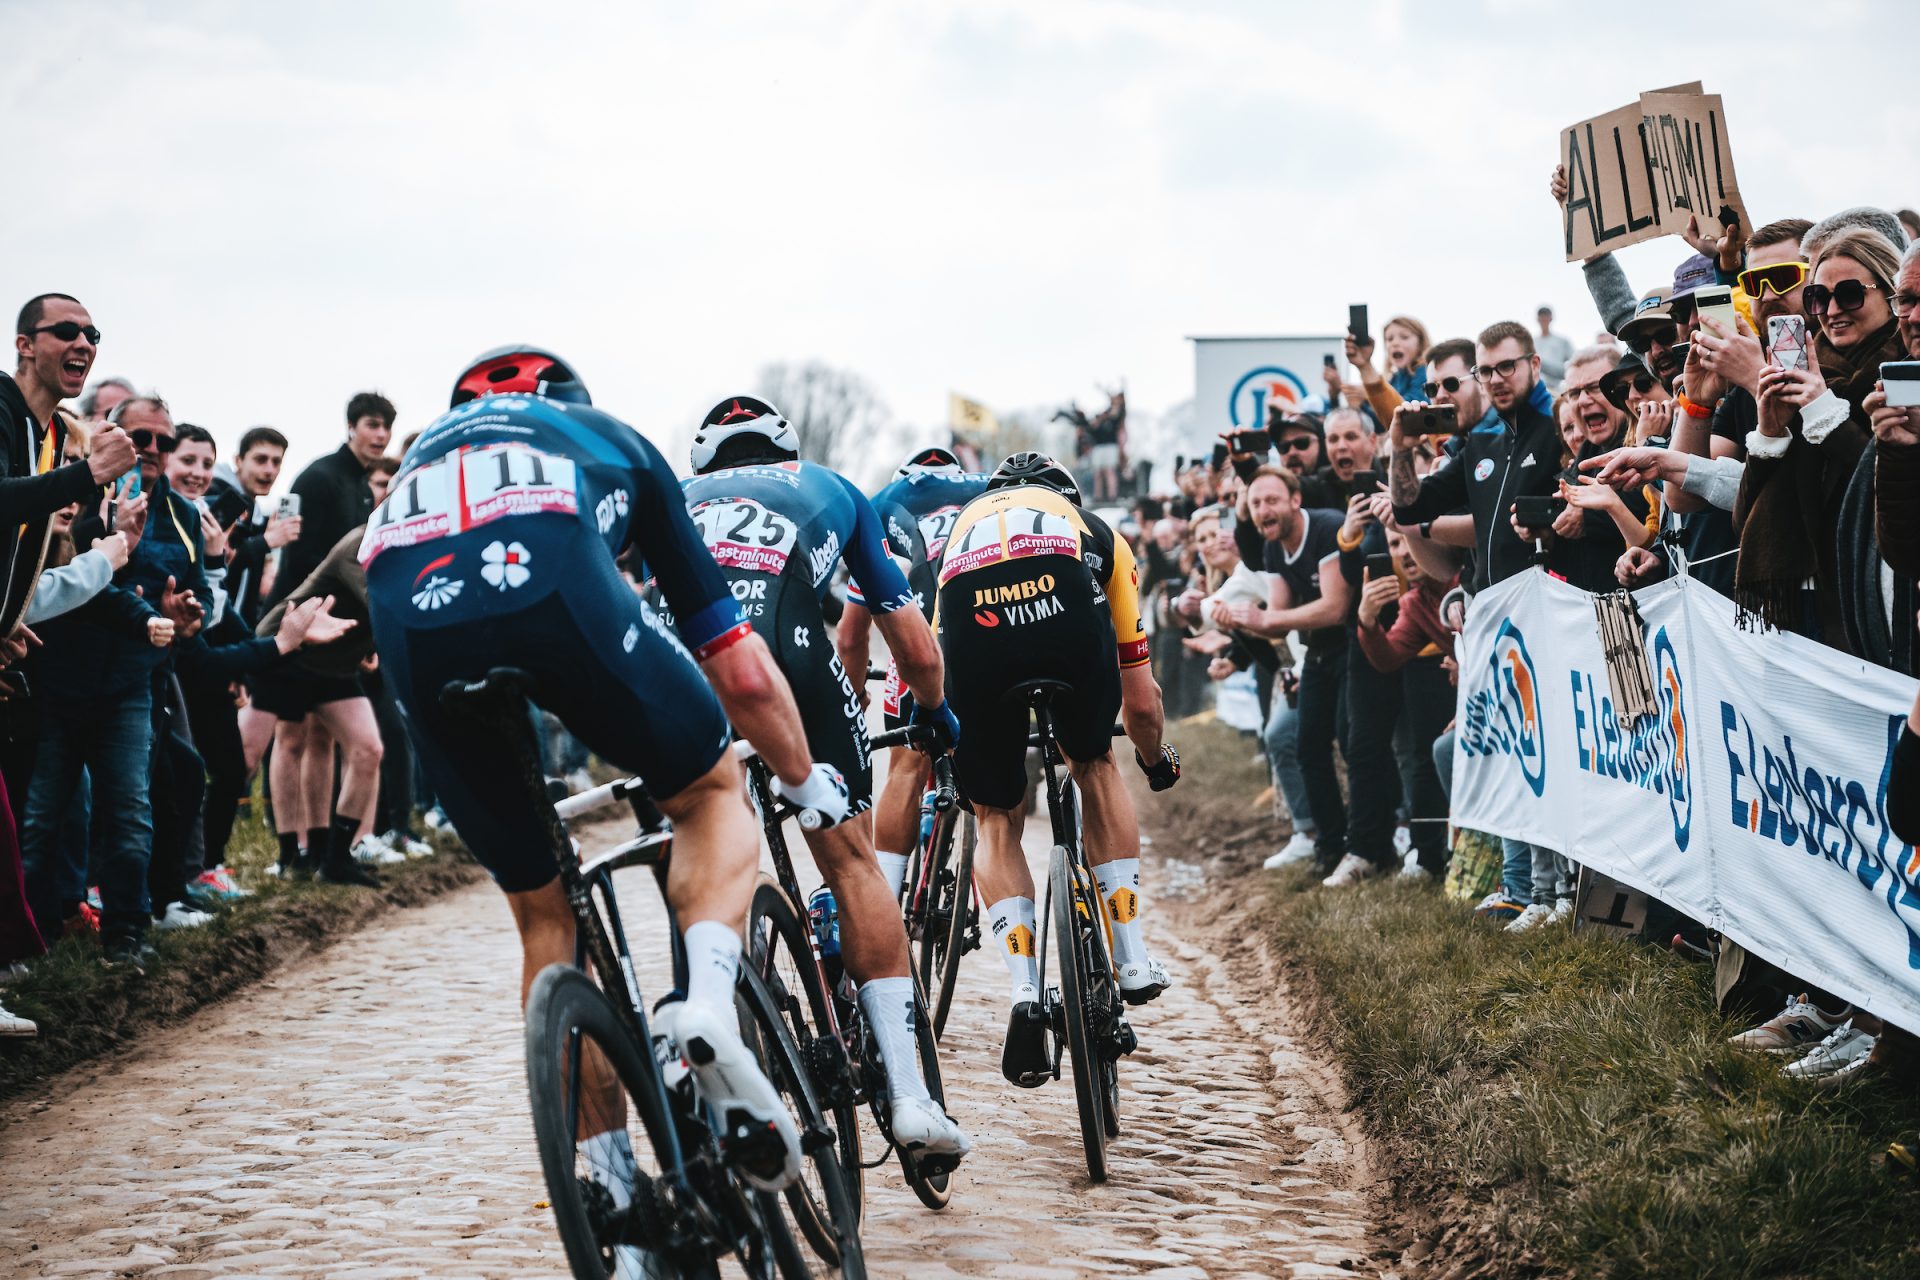 From the perspective of a photographer on a moto, a tight grou of riders navigates the cobbles while flanked by rows of supporters at the edge of the road.